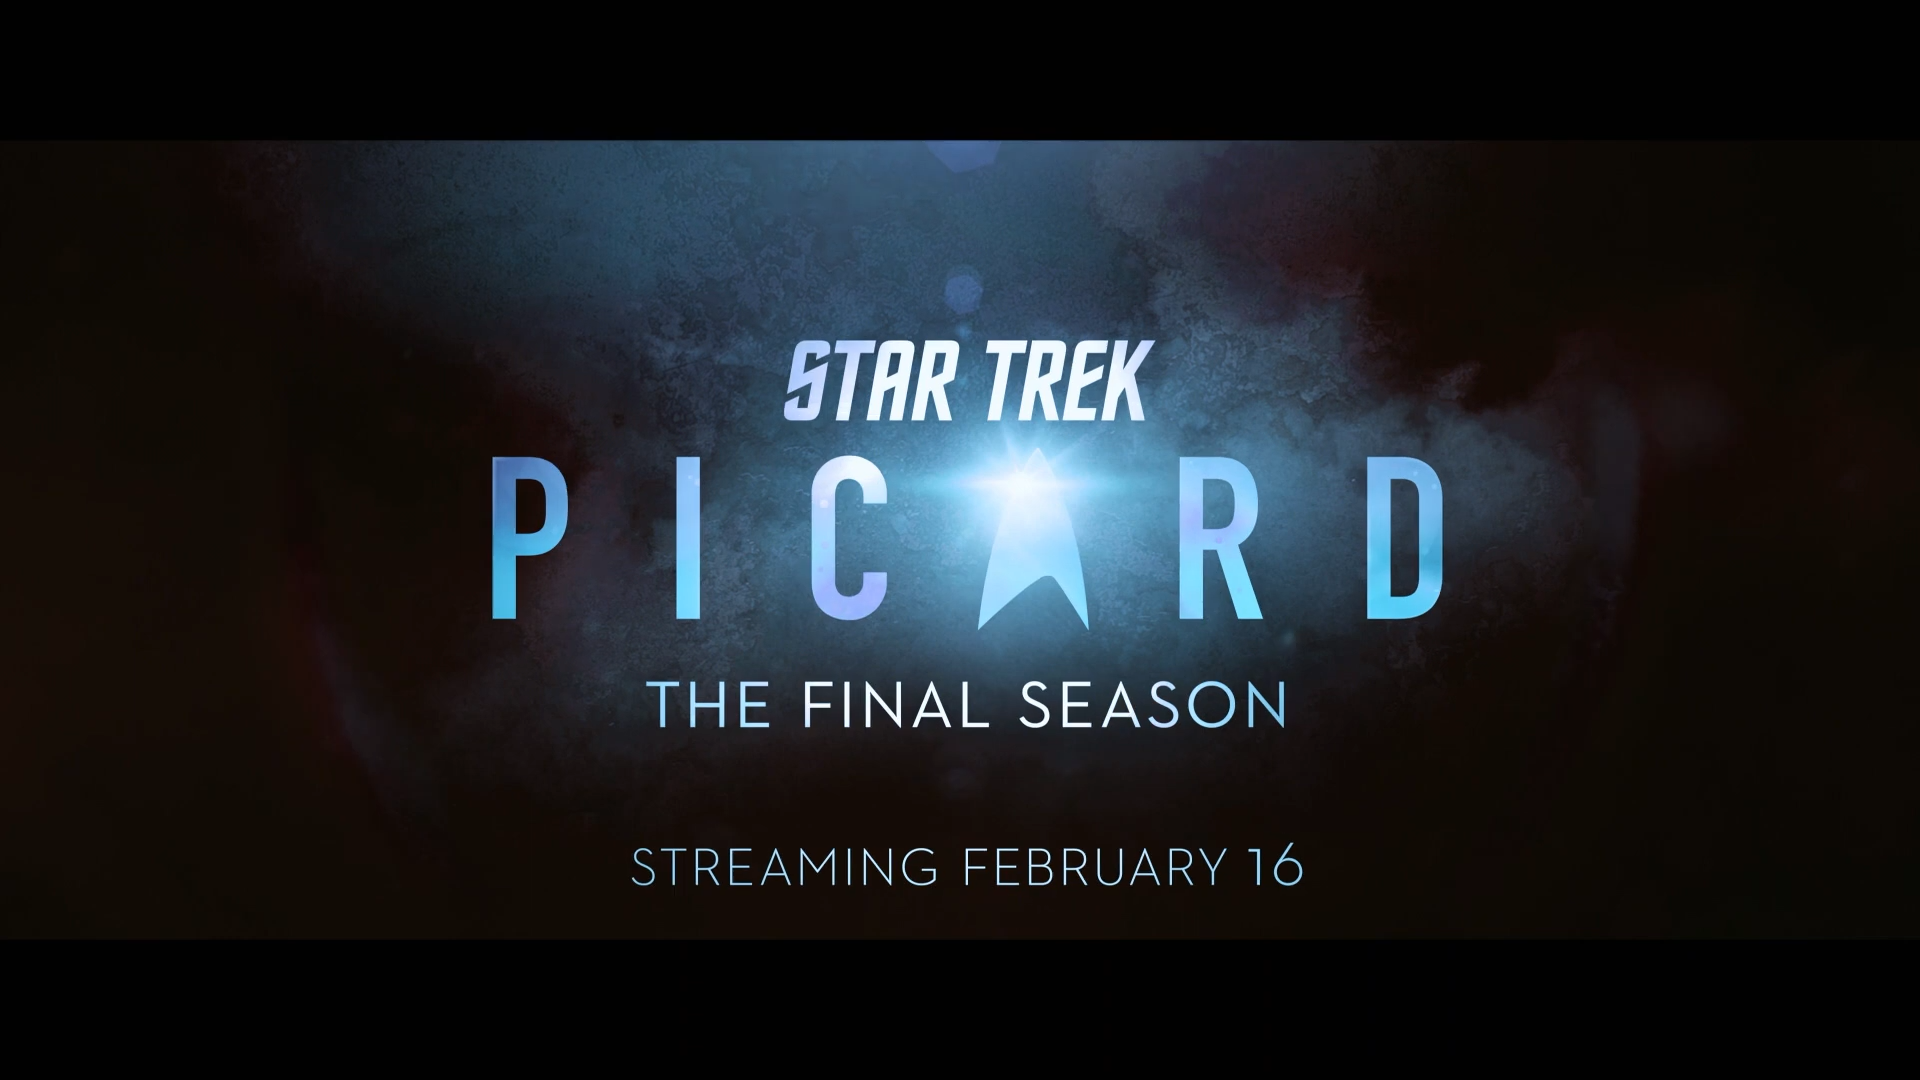 Picard S3 Premieres February 16th, 2023